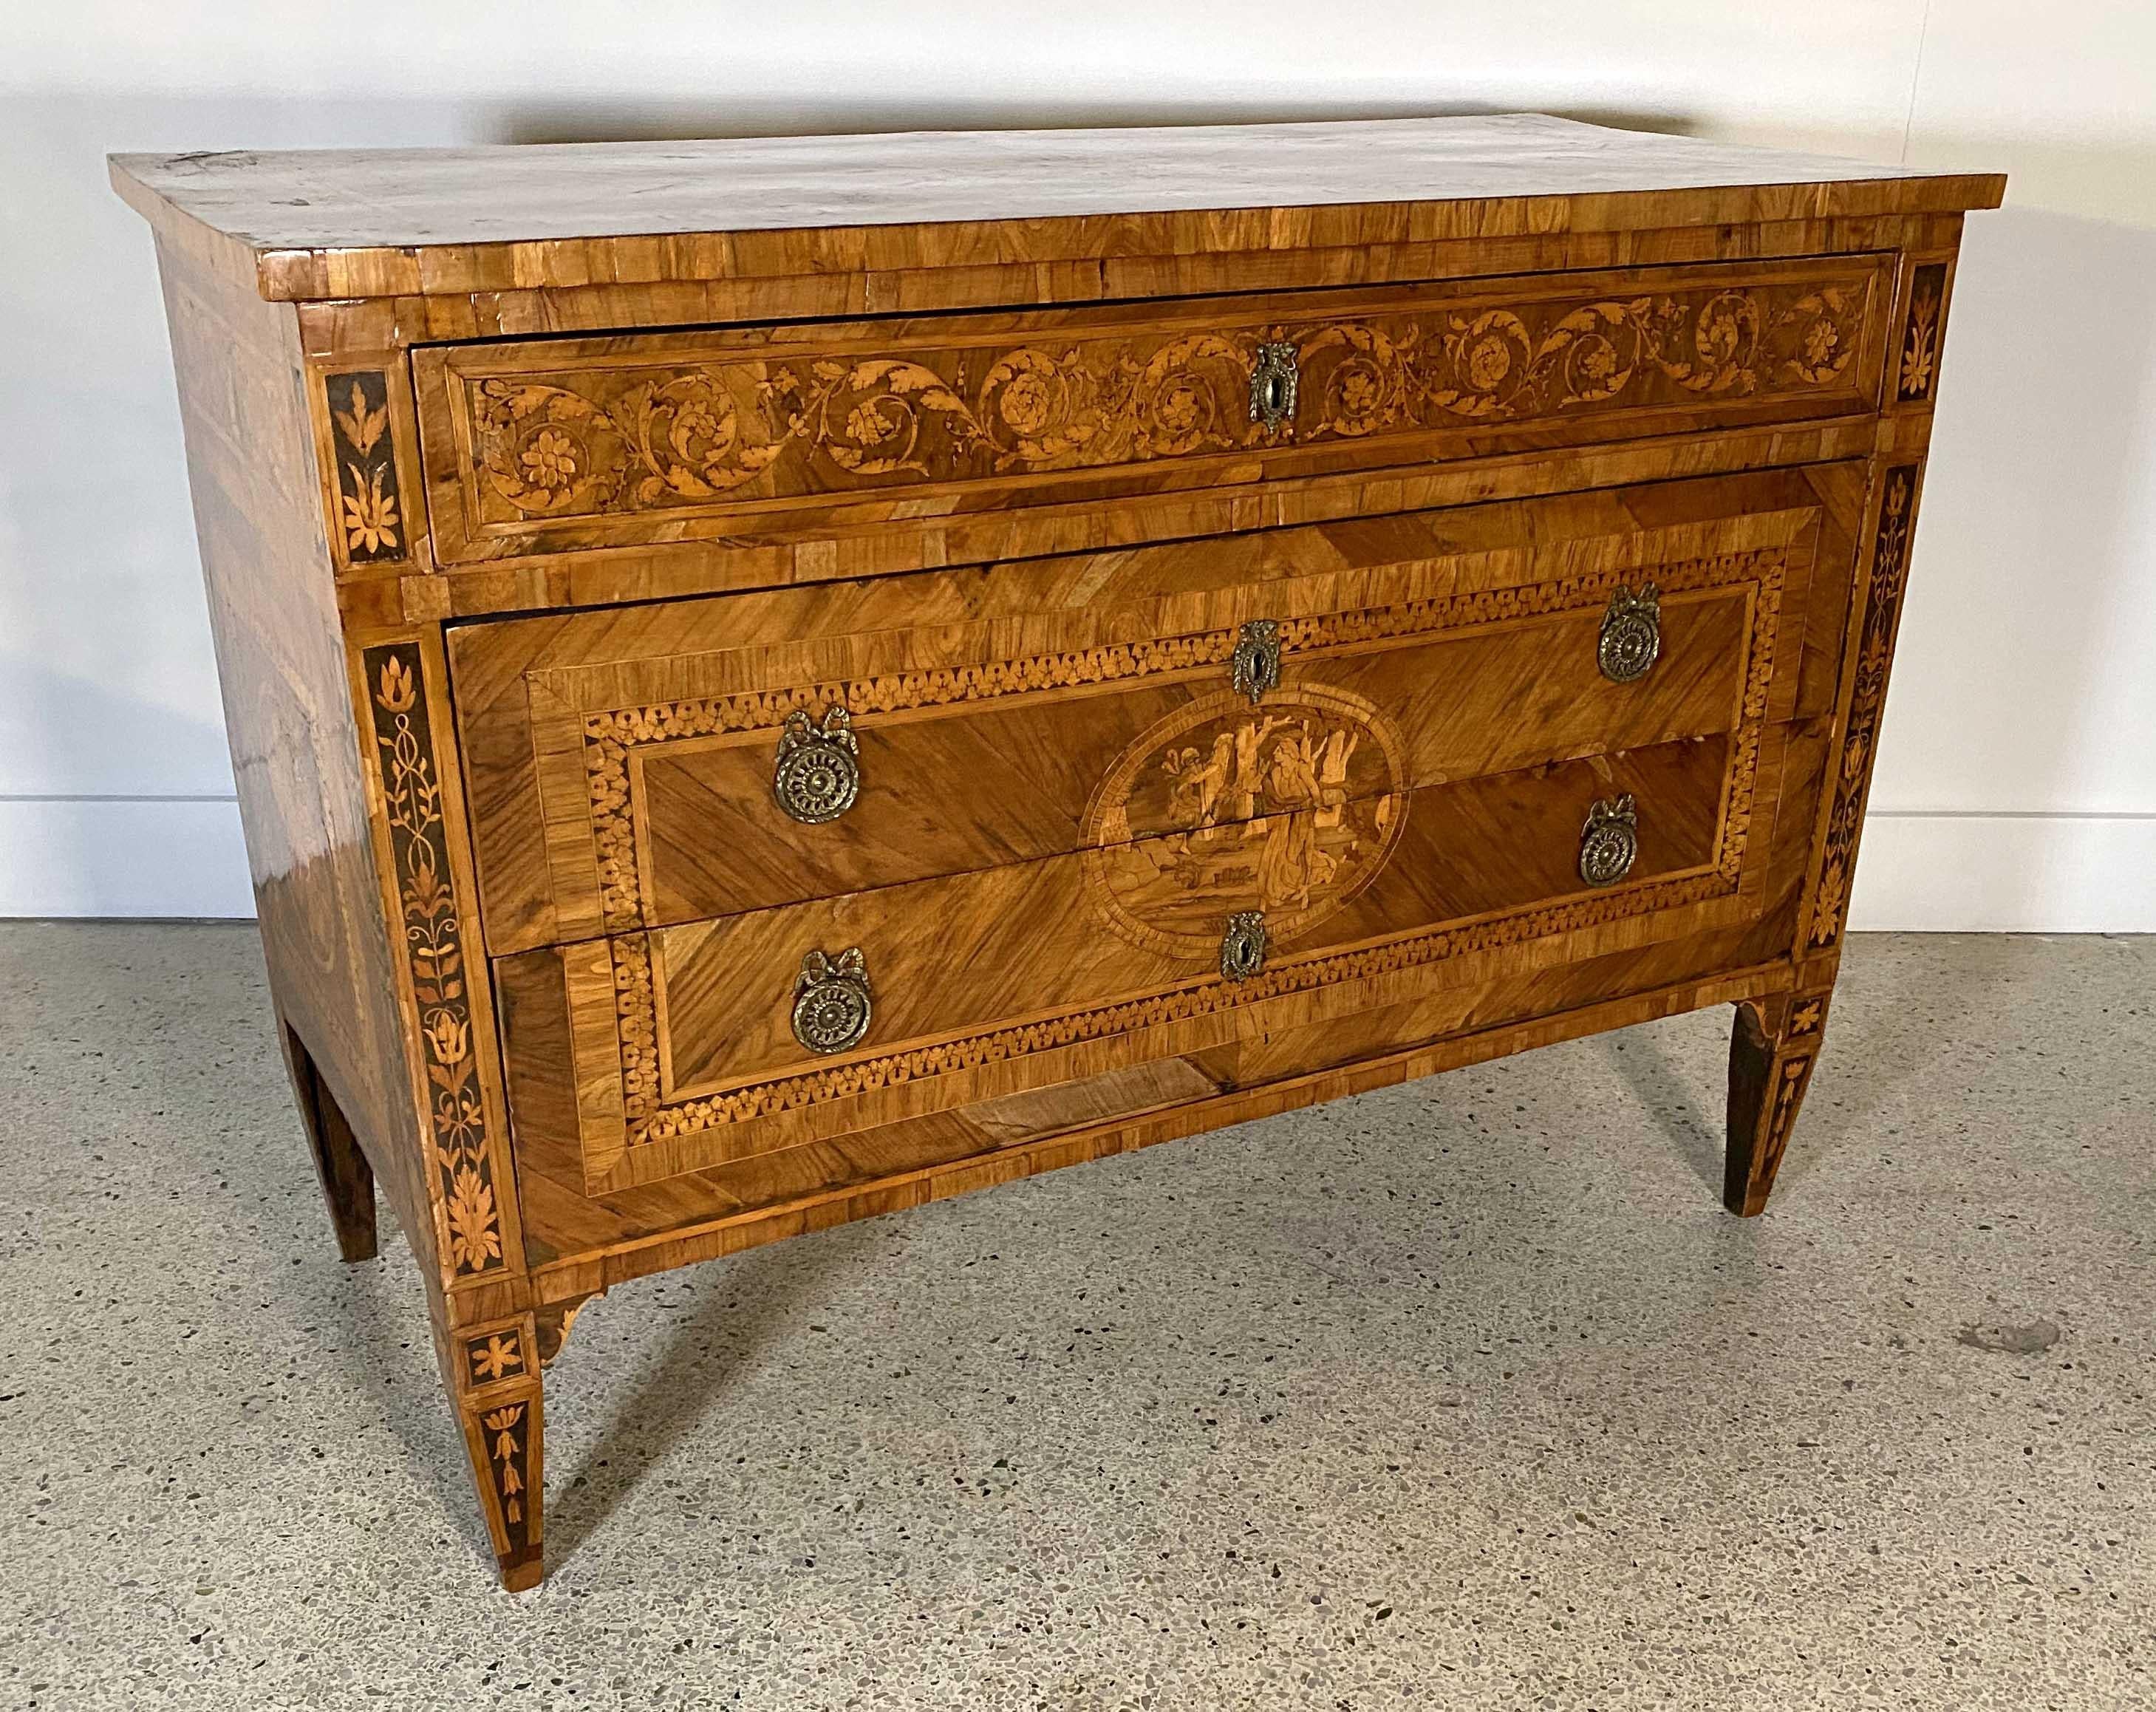 overall inlaid with exotic woods such as walnut, lemonwood, ebony, rosewood, by the great master cabinet maker Guiseppe Maggiolini.